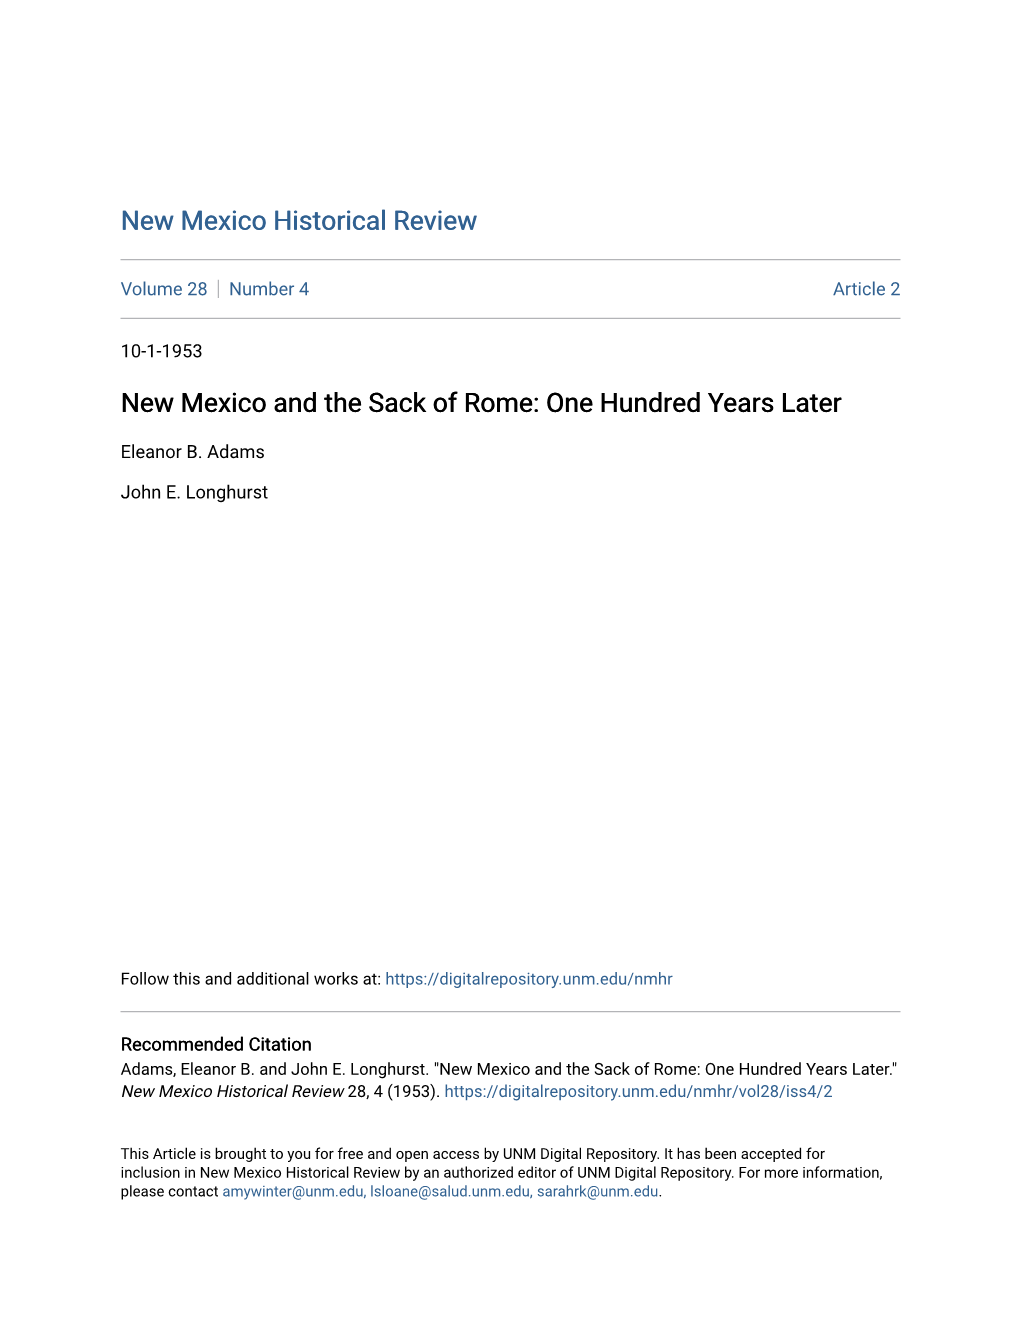 New Mexico and the Sack of Rome: One Hundred Years Later